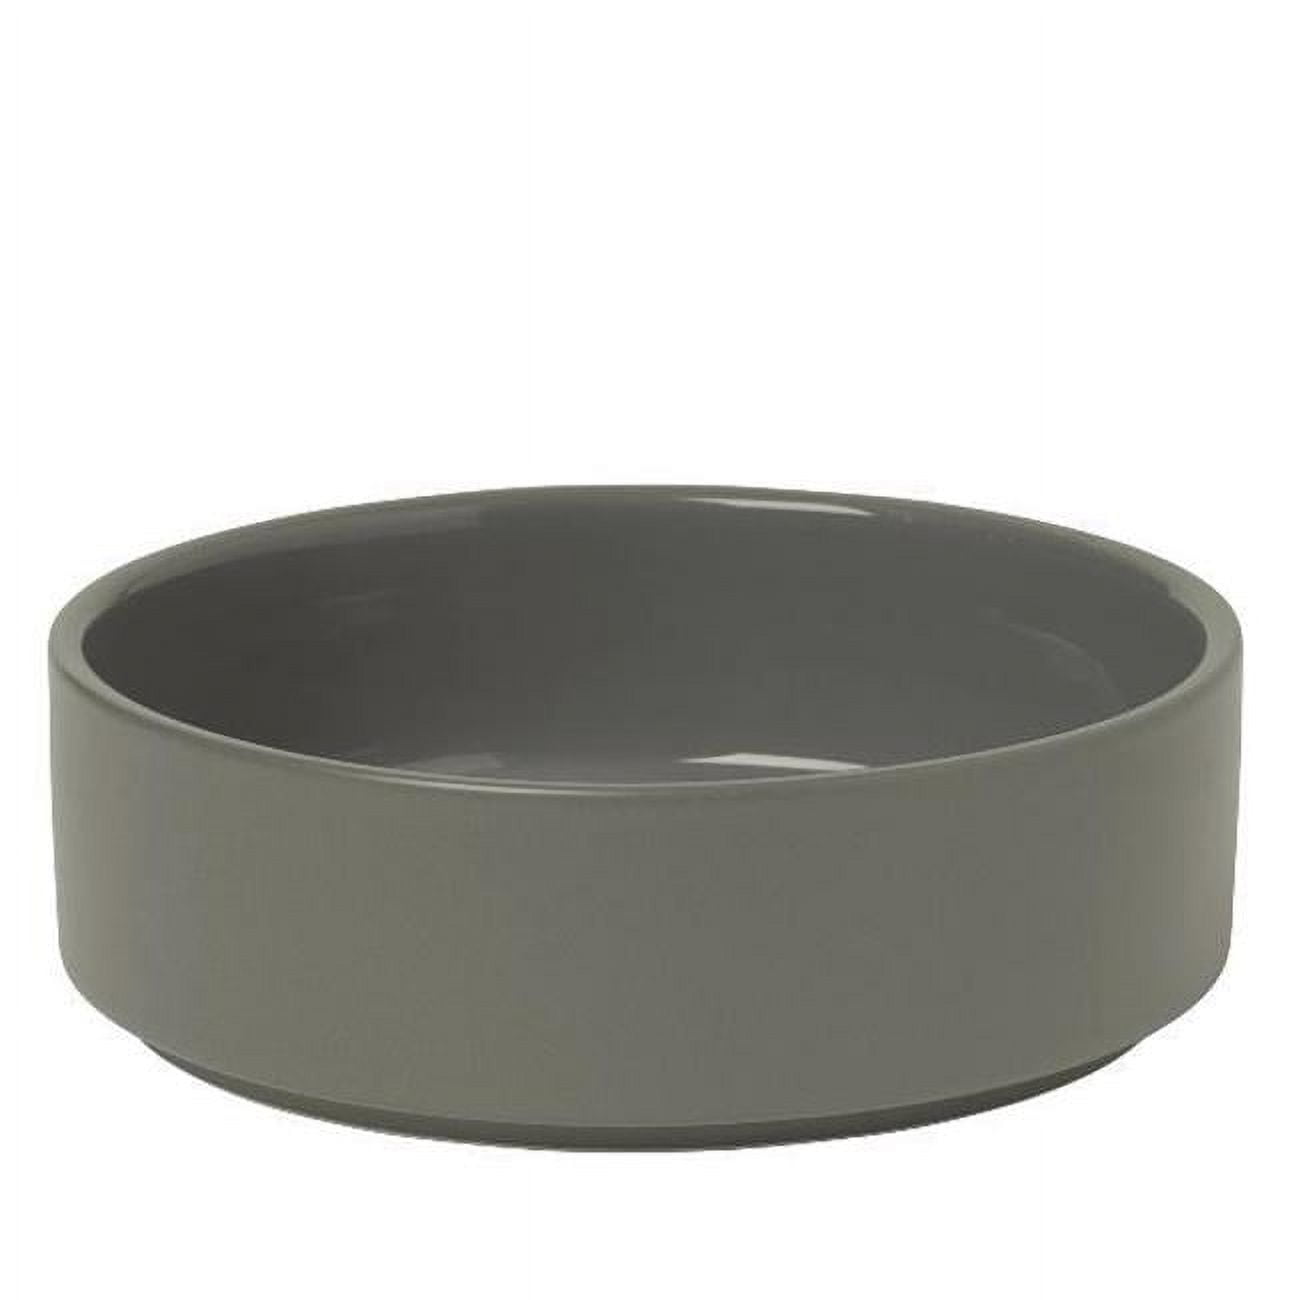 Picture of Blomus 63979.4 6 in. Pilar Shallow Bowl, Pewter - Set of 4